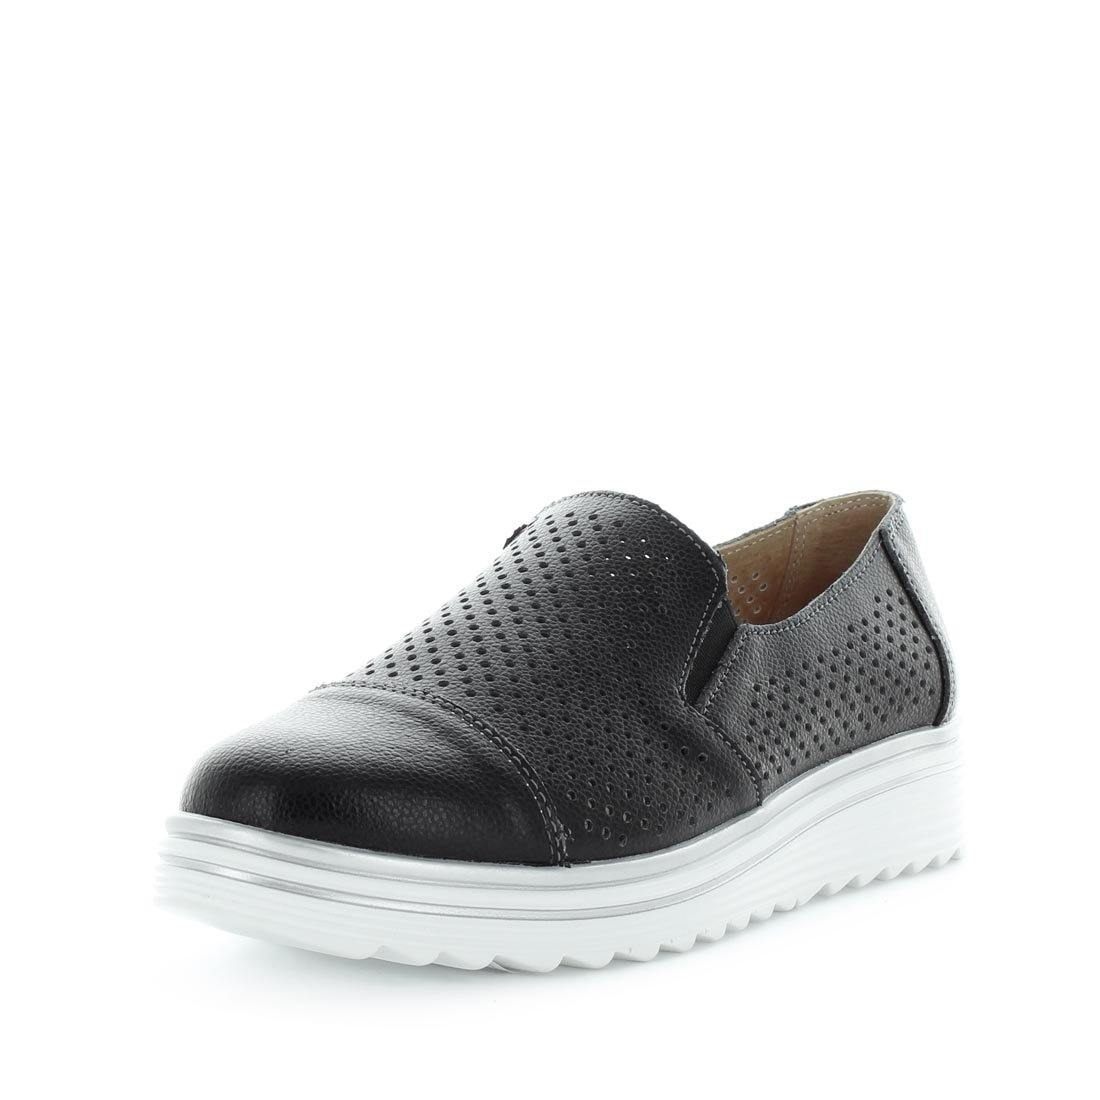 Just Bee comfort shoes - Crista by Just Bee - womens comfort shoes - flat slip-on style shoes with a laser cut upper and slight flatform wedge all wrapped in leather construction (6538287153231)